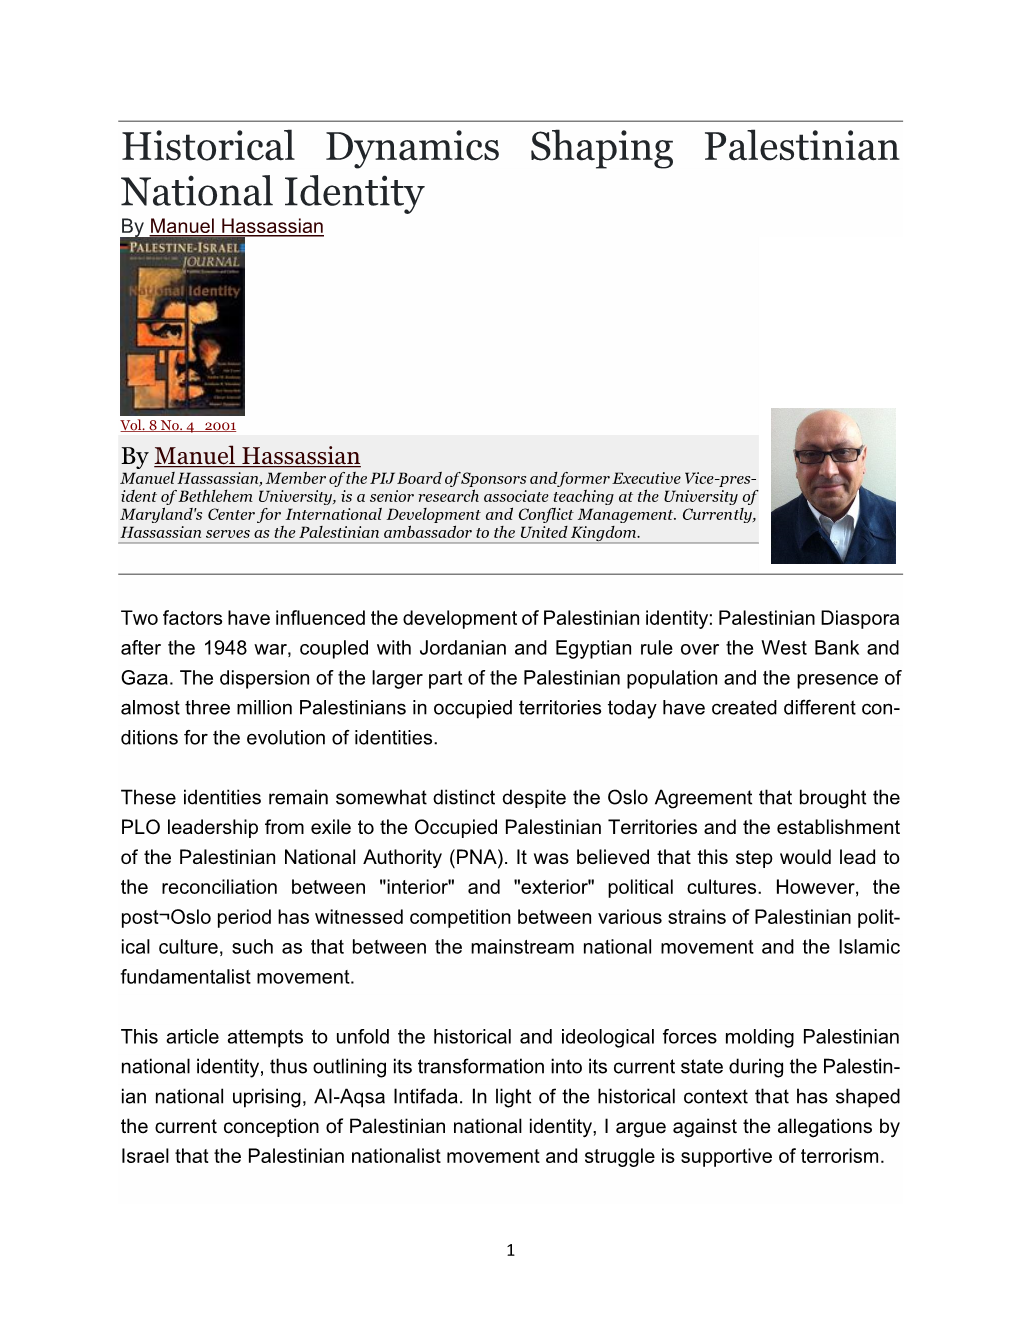 Historical Dynamics Shaping Palestinian National Identity by Manuel Hassassian